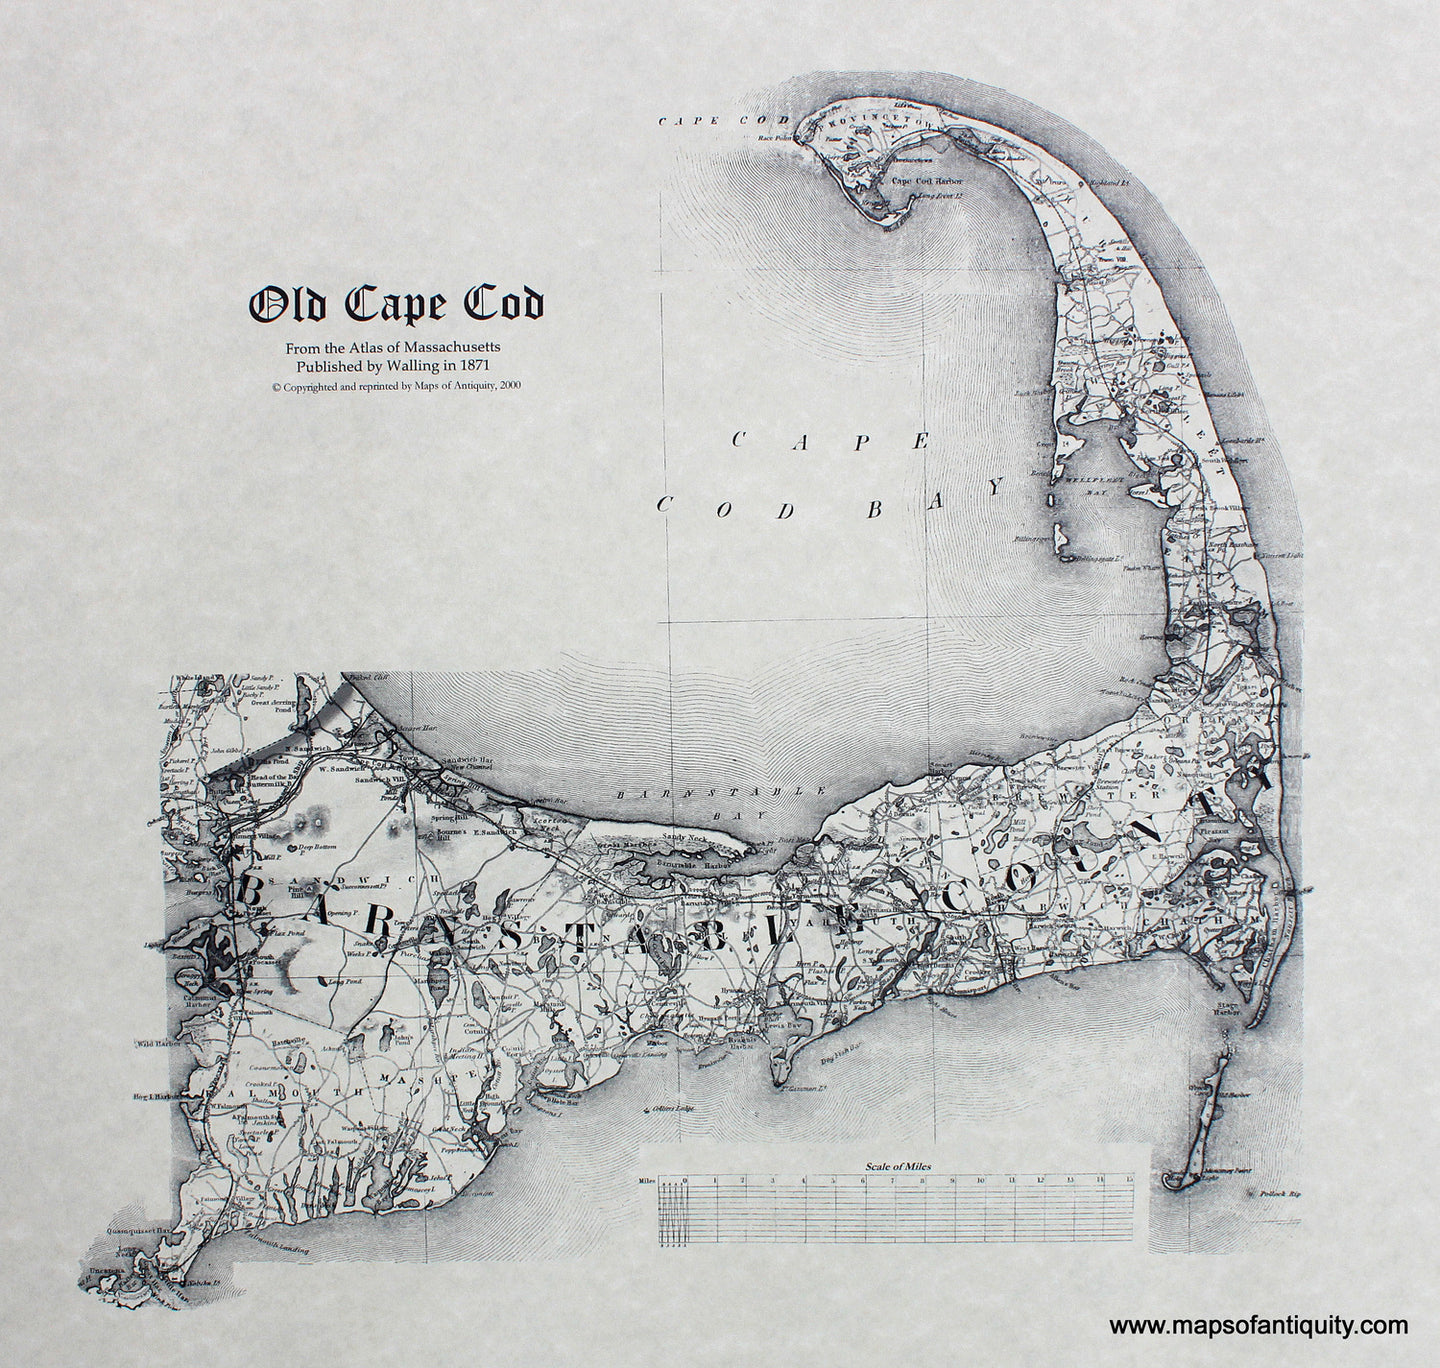 Black-and-White-Reproduction-Old-Cape-Cod---Reproduction-Reproductions-Cape-Cod-and-Islands-Reproduction-Walling-and-Gray-Maps-Of-Antiquity